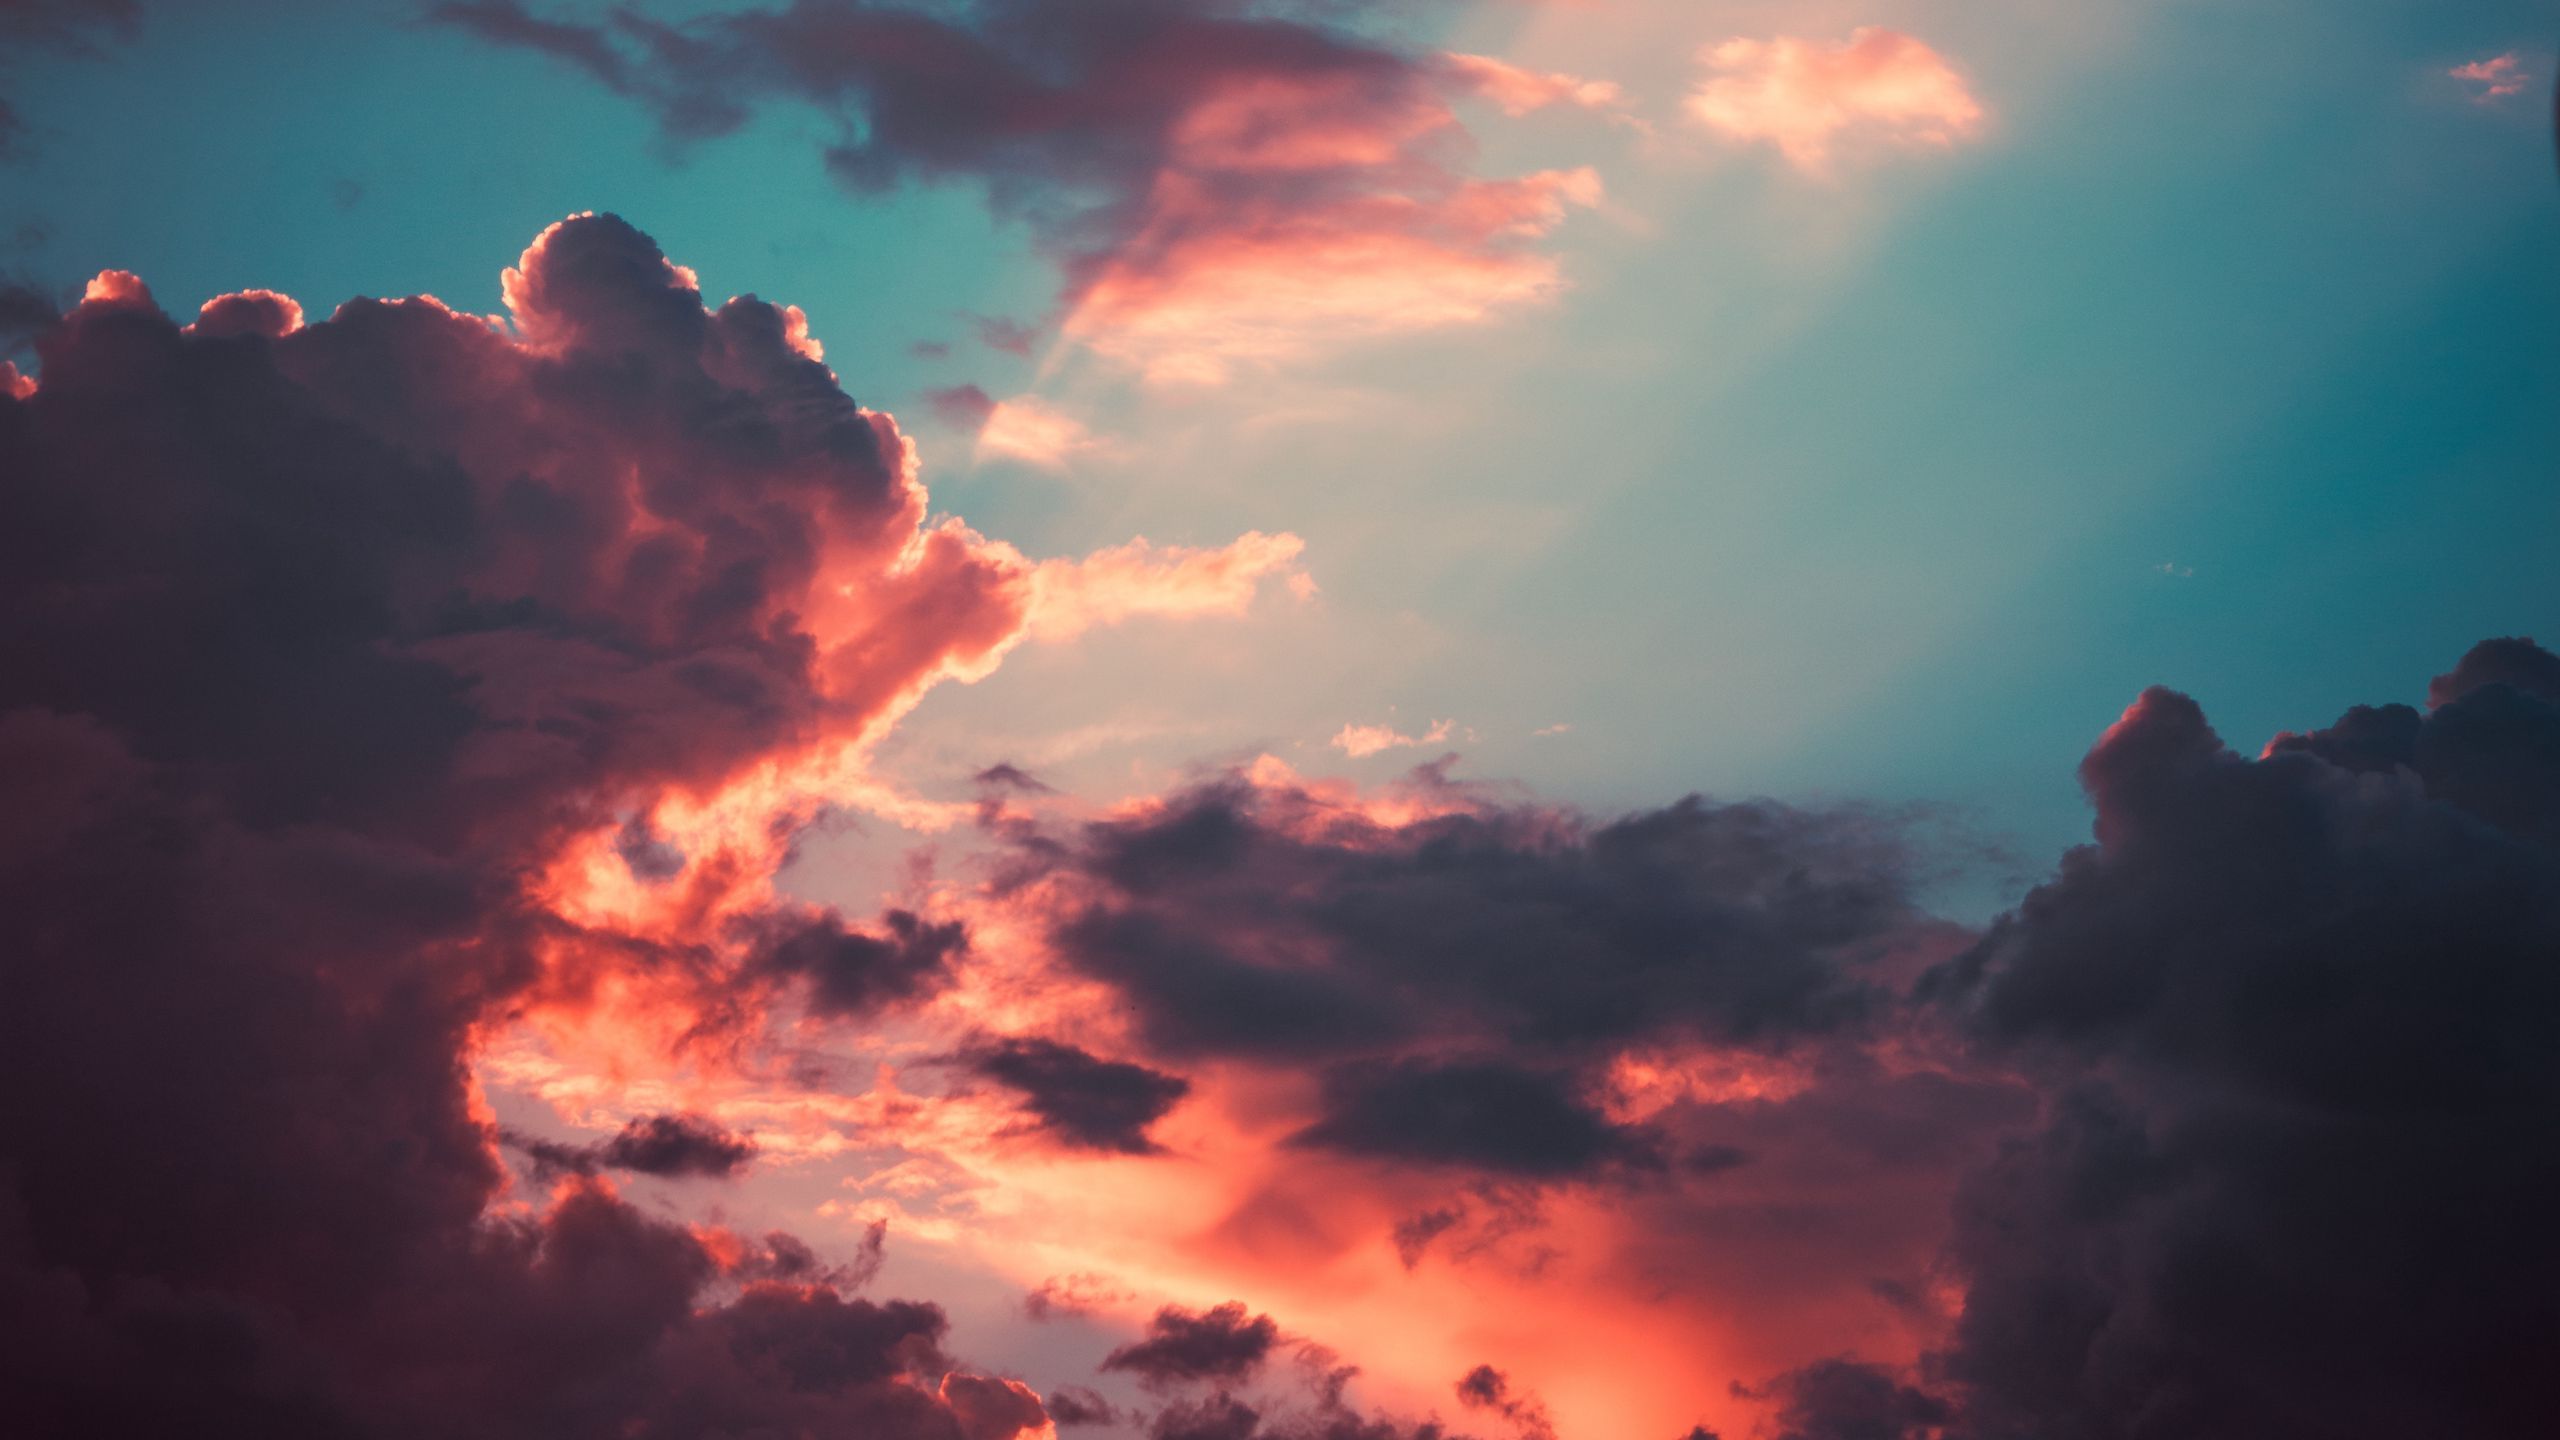 Download wallpaper 2560x1440 clouds, porous, sky, sunset, overcast widescreen 16:9 HD background